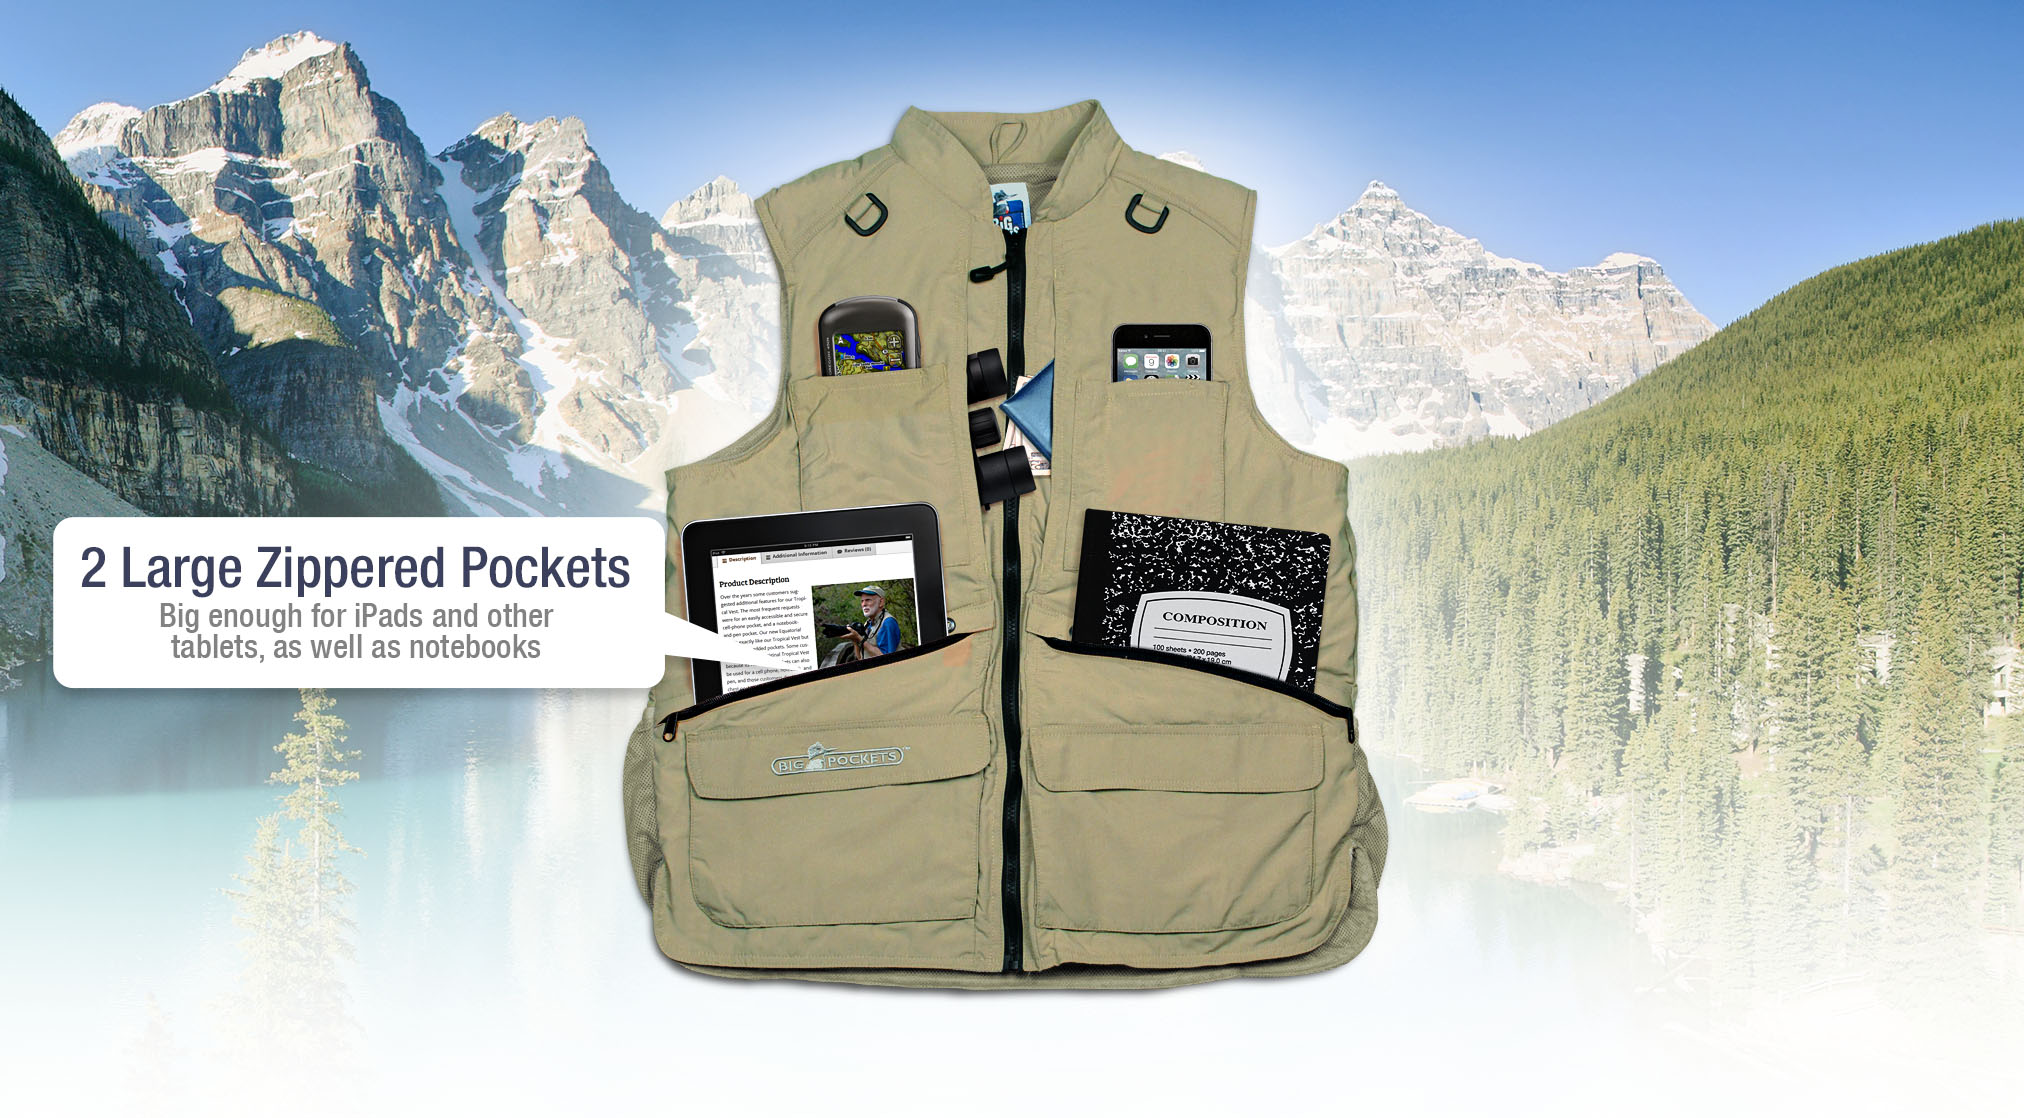 2 Large Zippered Pockets big enough for iPads and other tablets, as well as notebooks